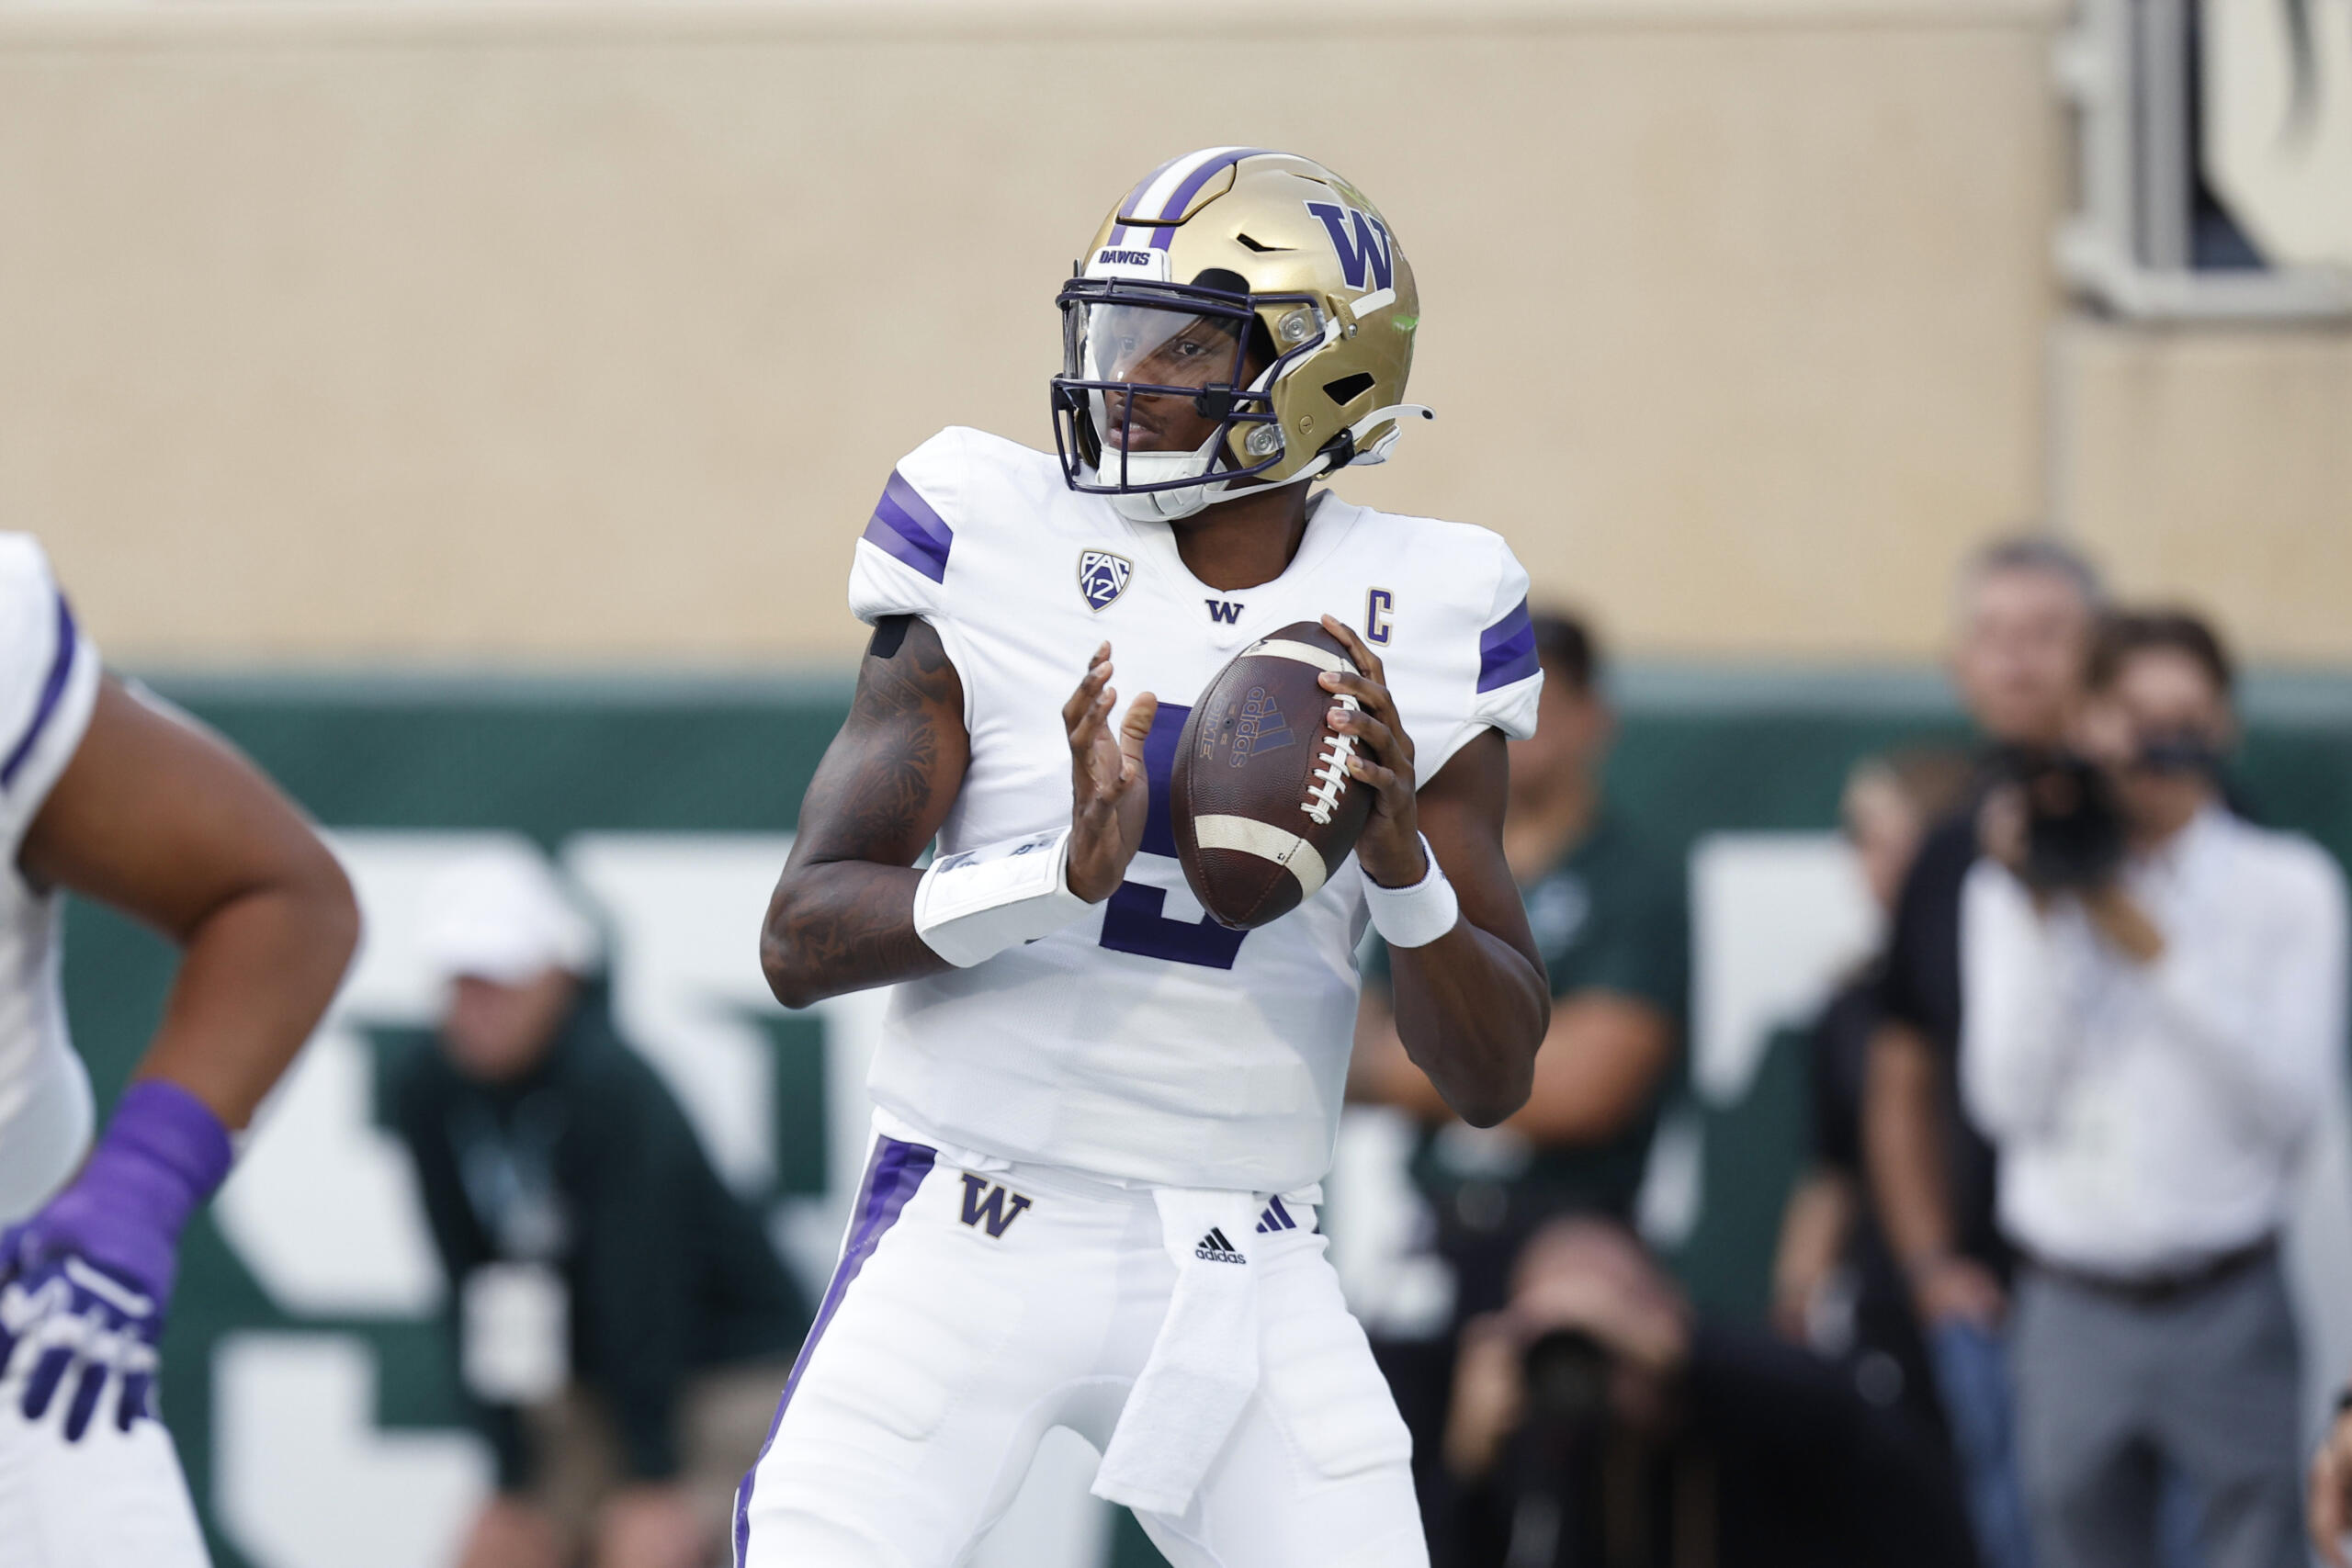 Washington quarterback Michael Penix Jr. looks to throw during the first half of an NCAA college football game against Michigan State, Saturday, Sept. 16, 2023, in East Lansing, Mich.